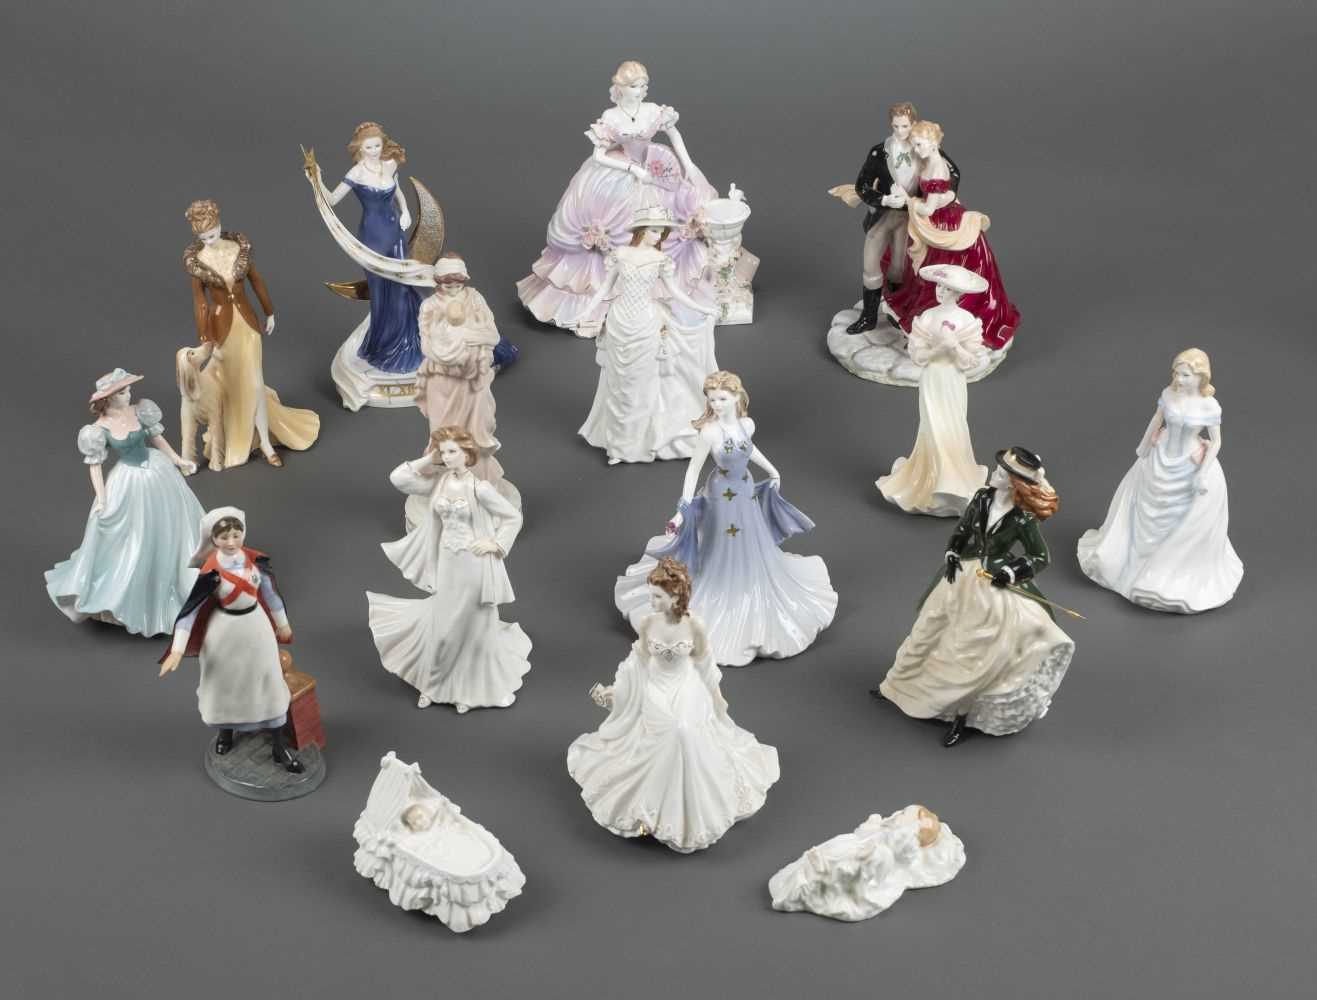 Lot 24 - Figurines. A large collection of Royal Doulton and Royal Worcester figurines